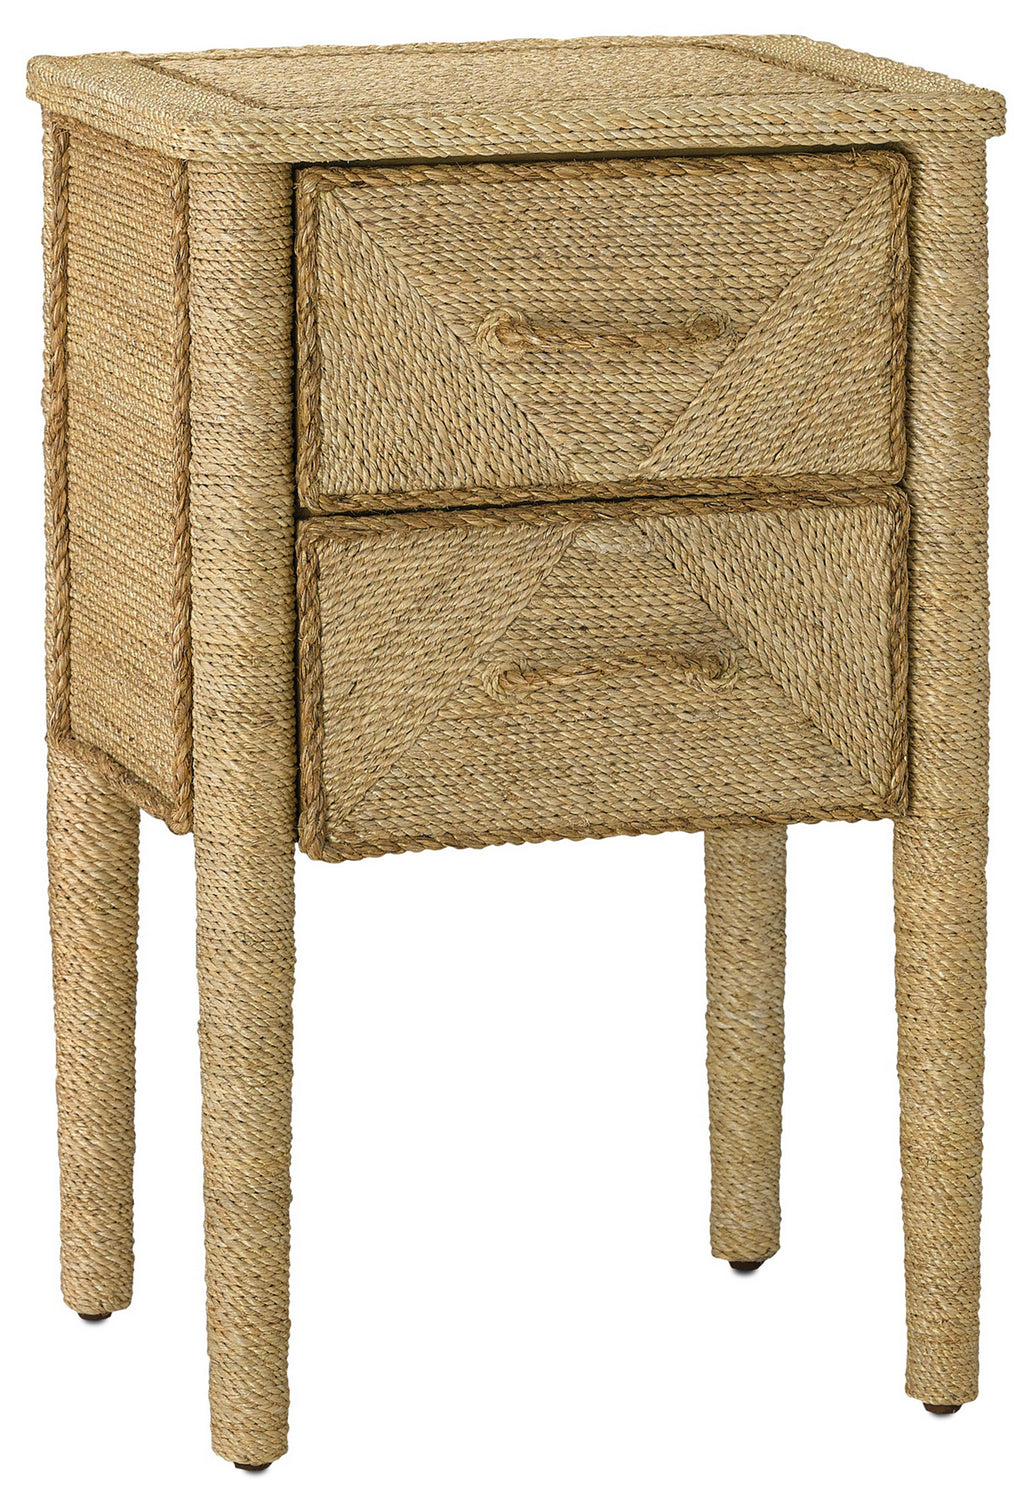 Nightstand from the Kaipo collection in Natural finish